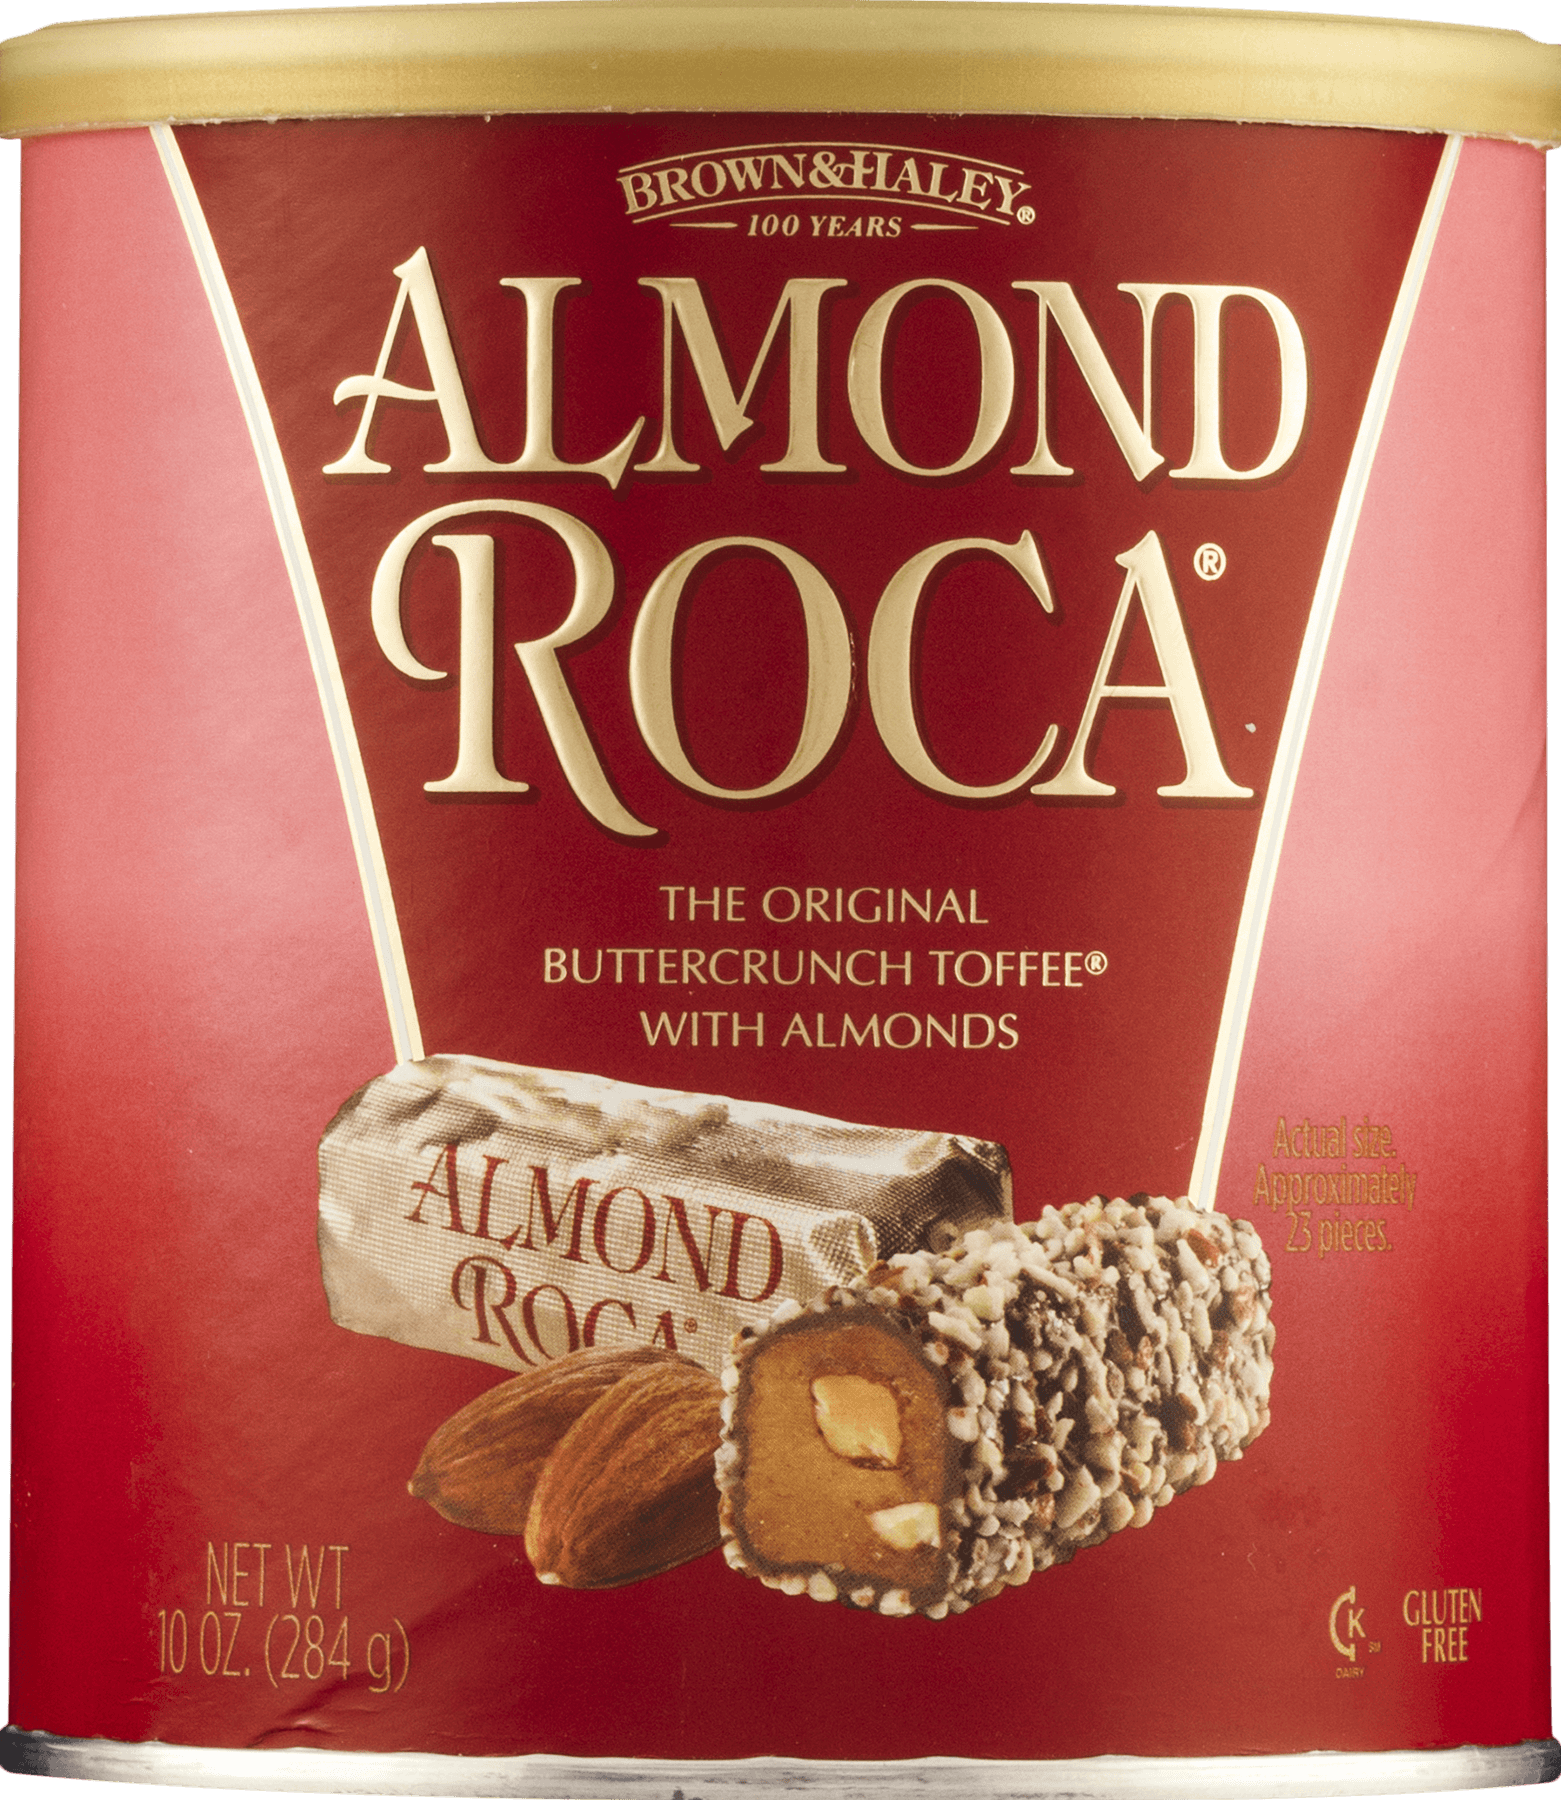 Brown & Haley Roca Buttercrunch Toffee with Chocolate & Almonds, 10 Oz. - image 1 of 8